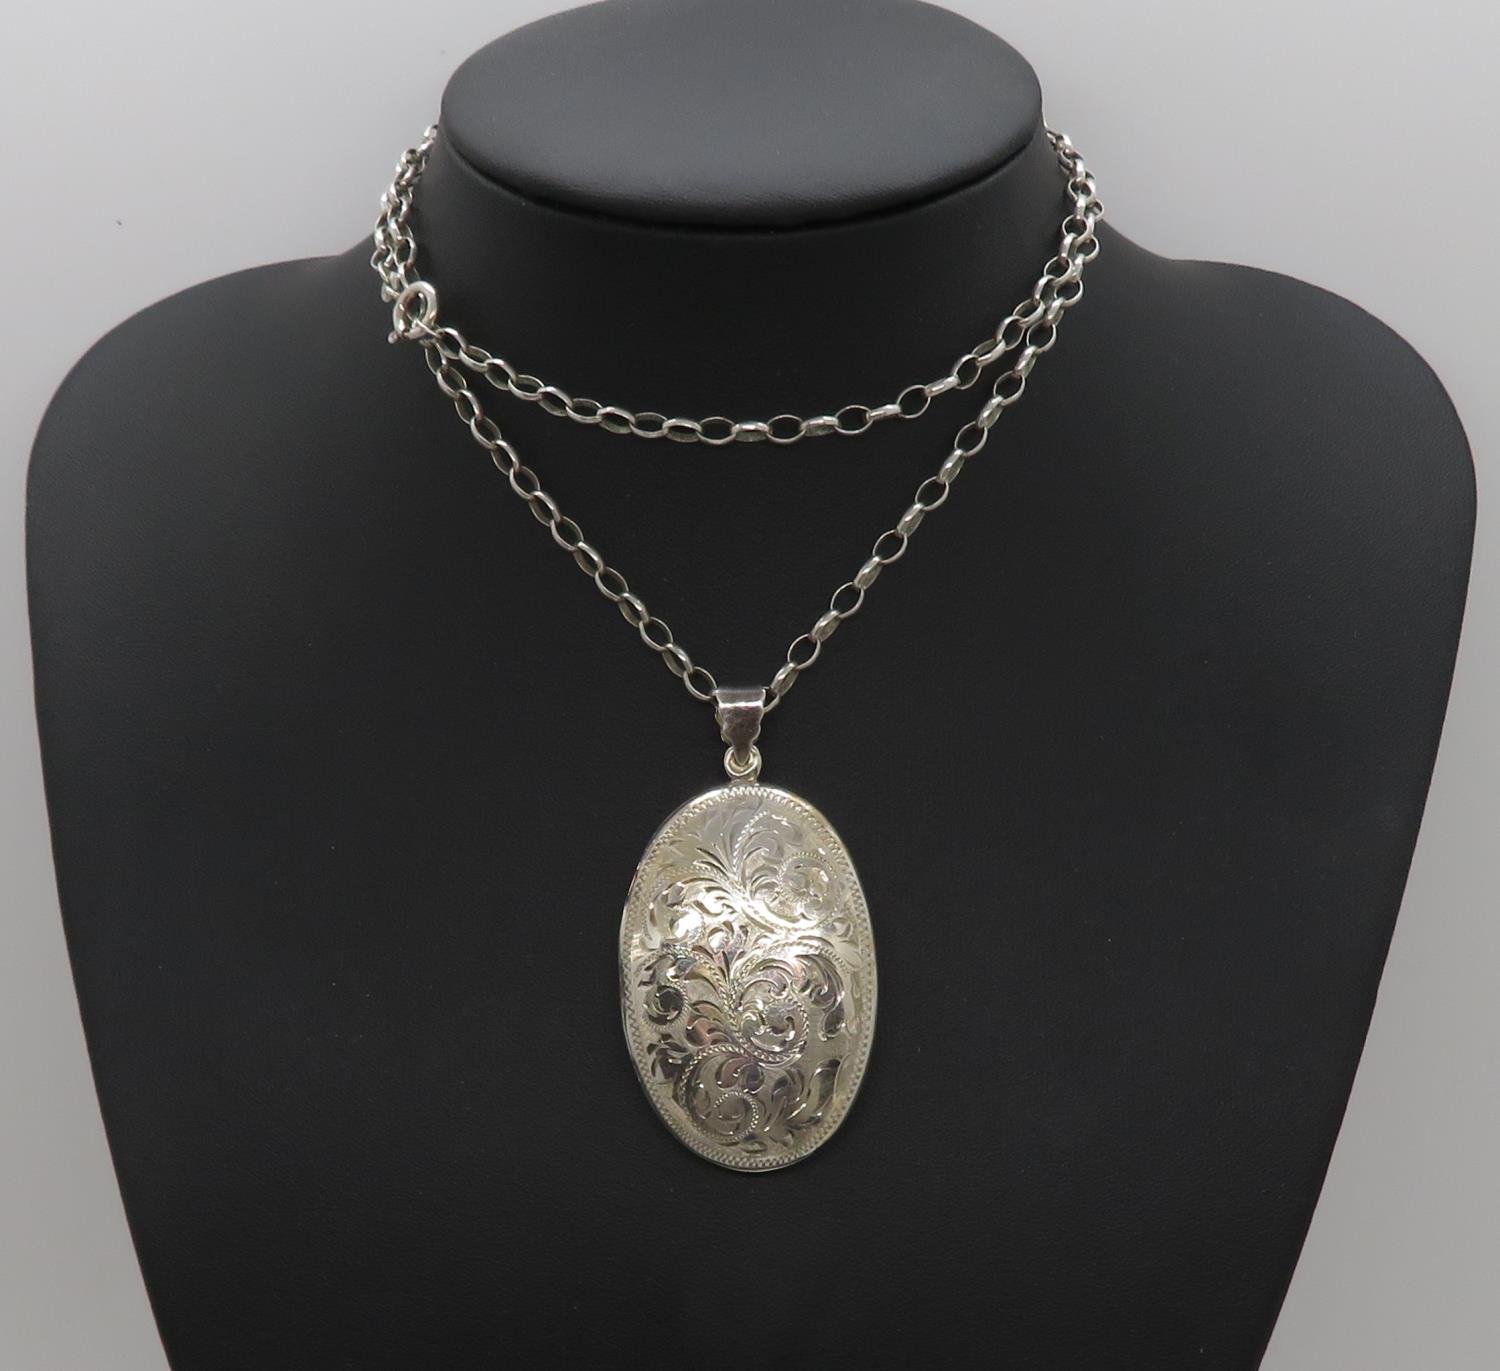 Double sided engraved locket on 24" belcher chain silver